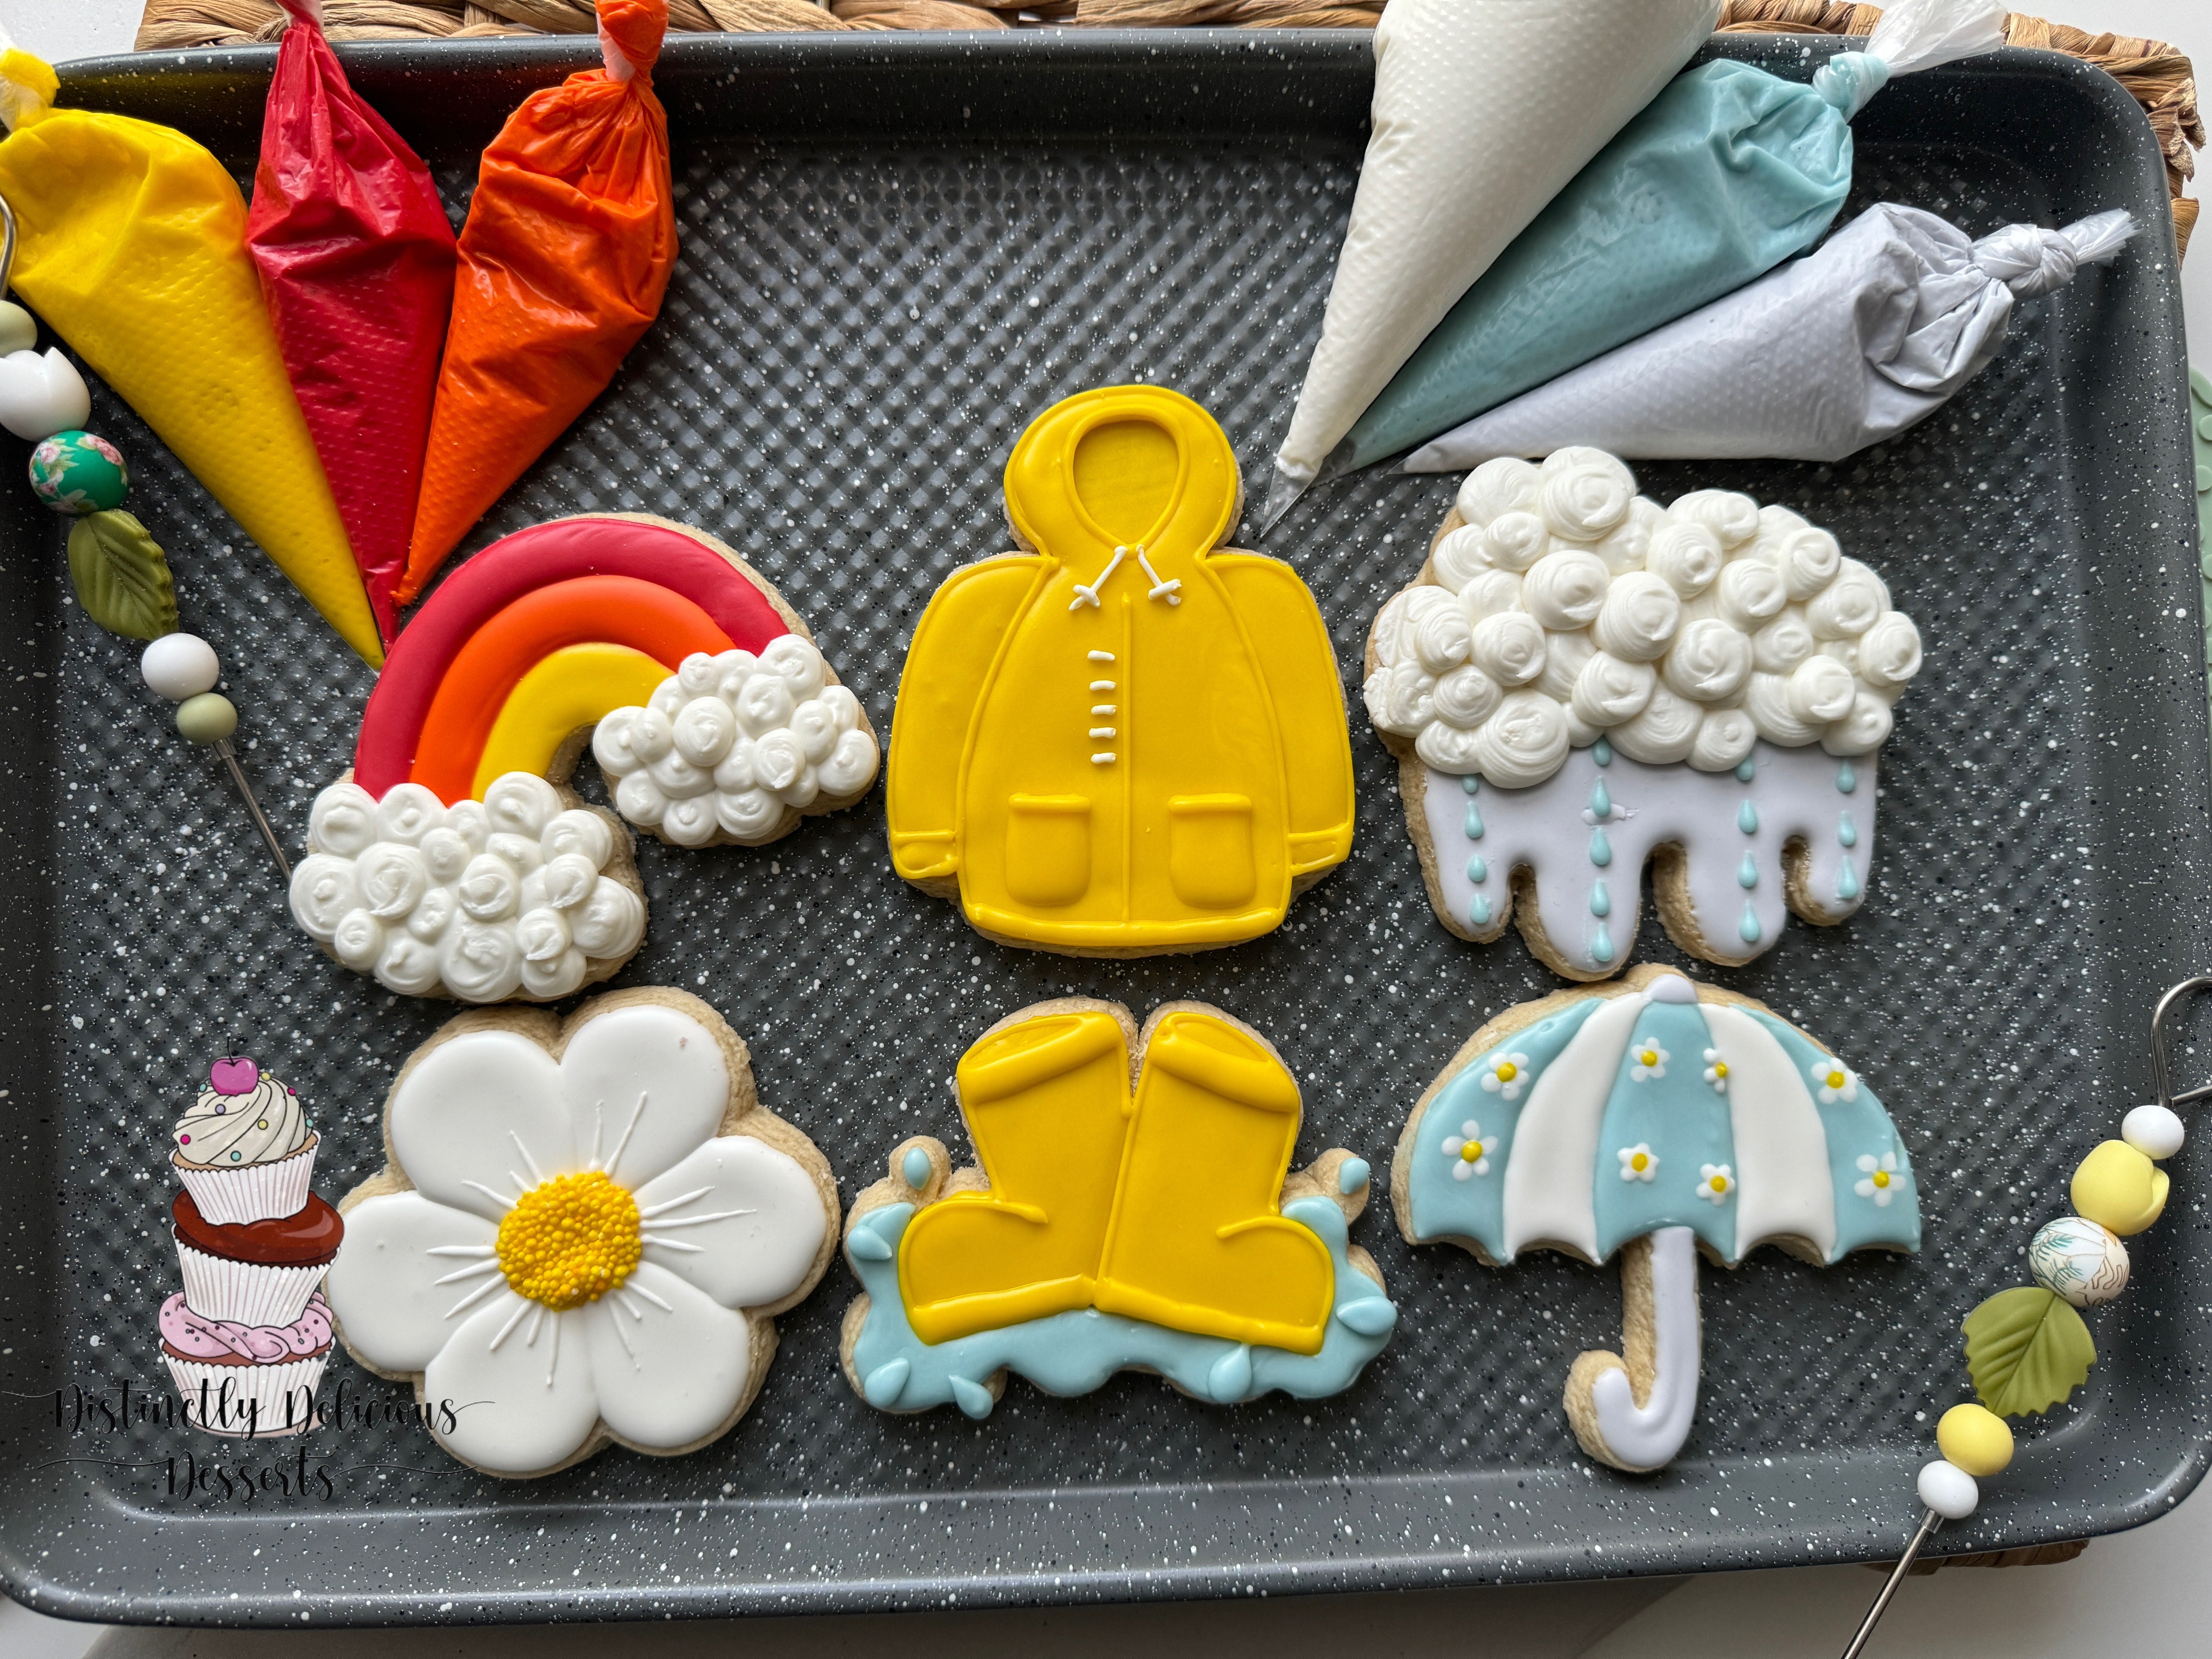 "April Showers" Cookie Decorating Experience (Sat. 4/6)